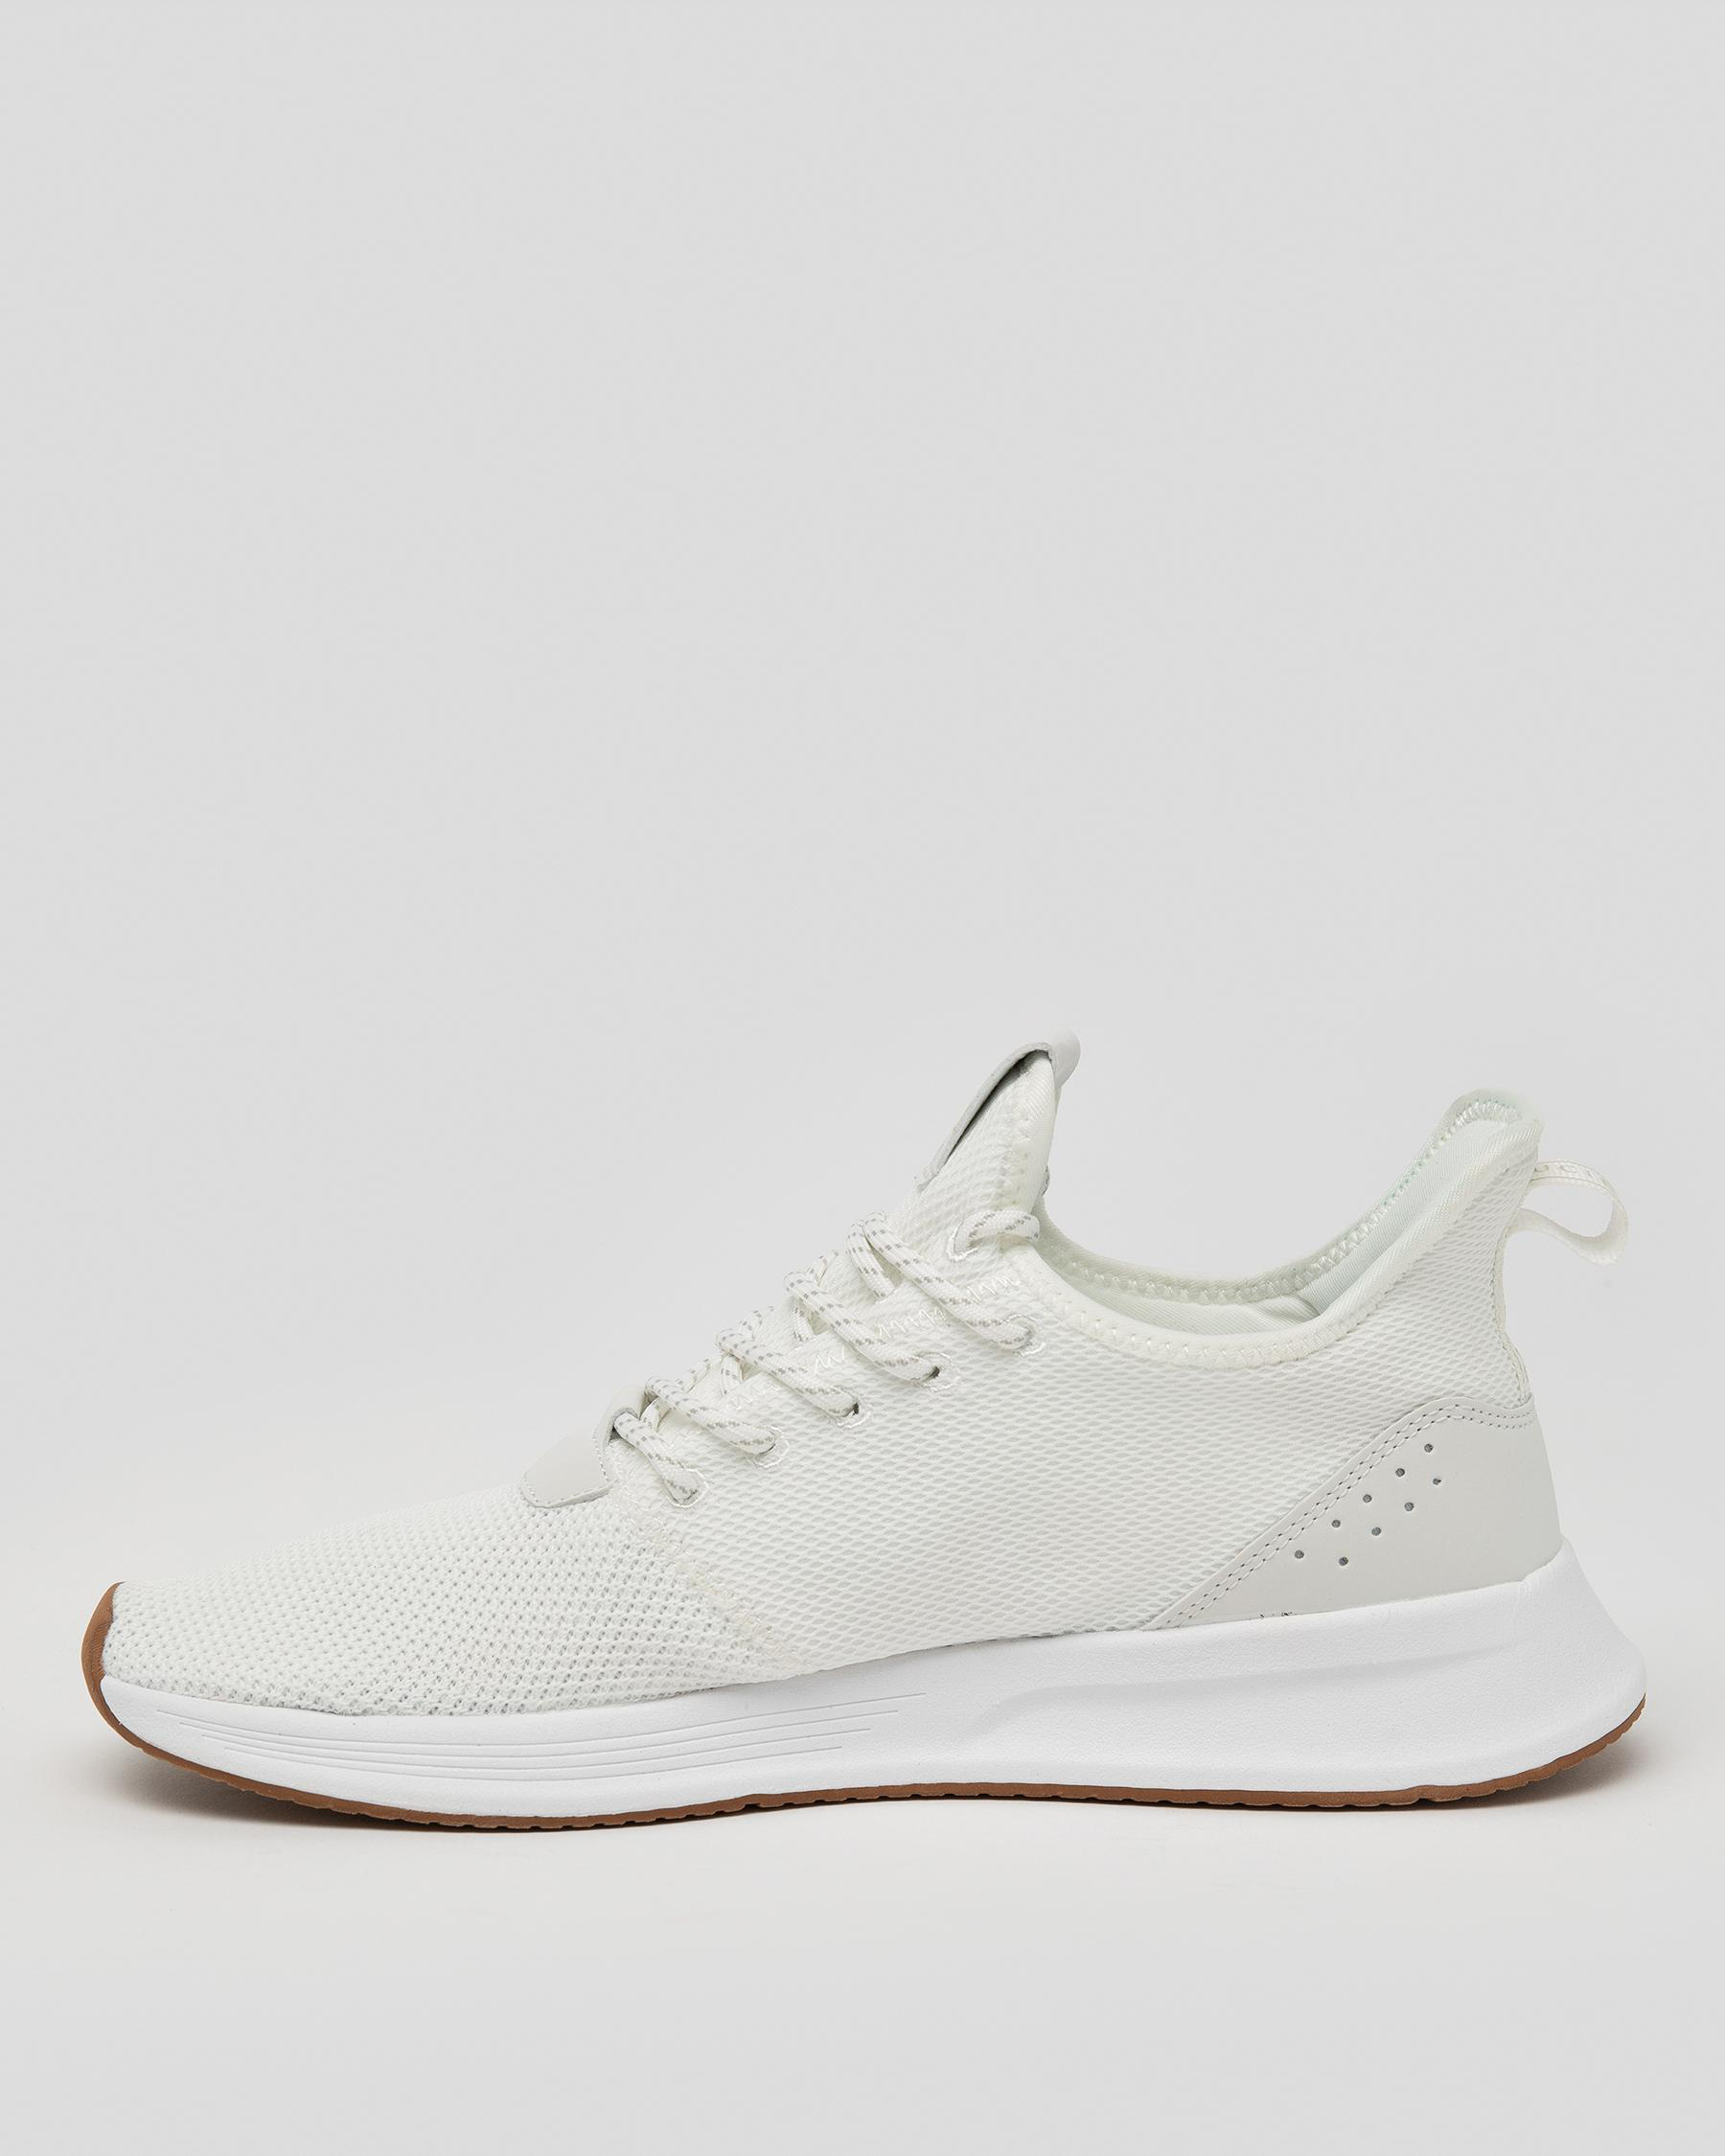 Lucid Aston Shoes In White/grey/gum - Fast Shipping & Easy Returns ...